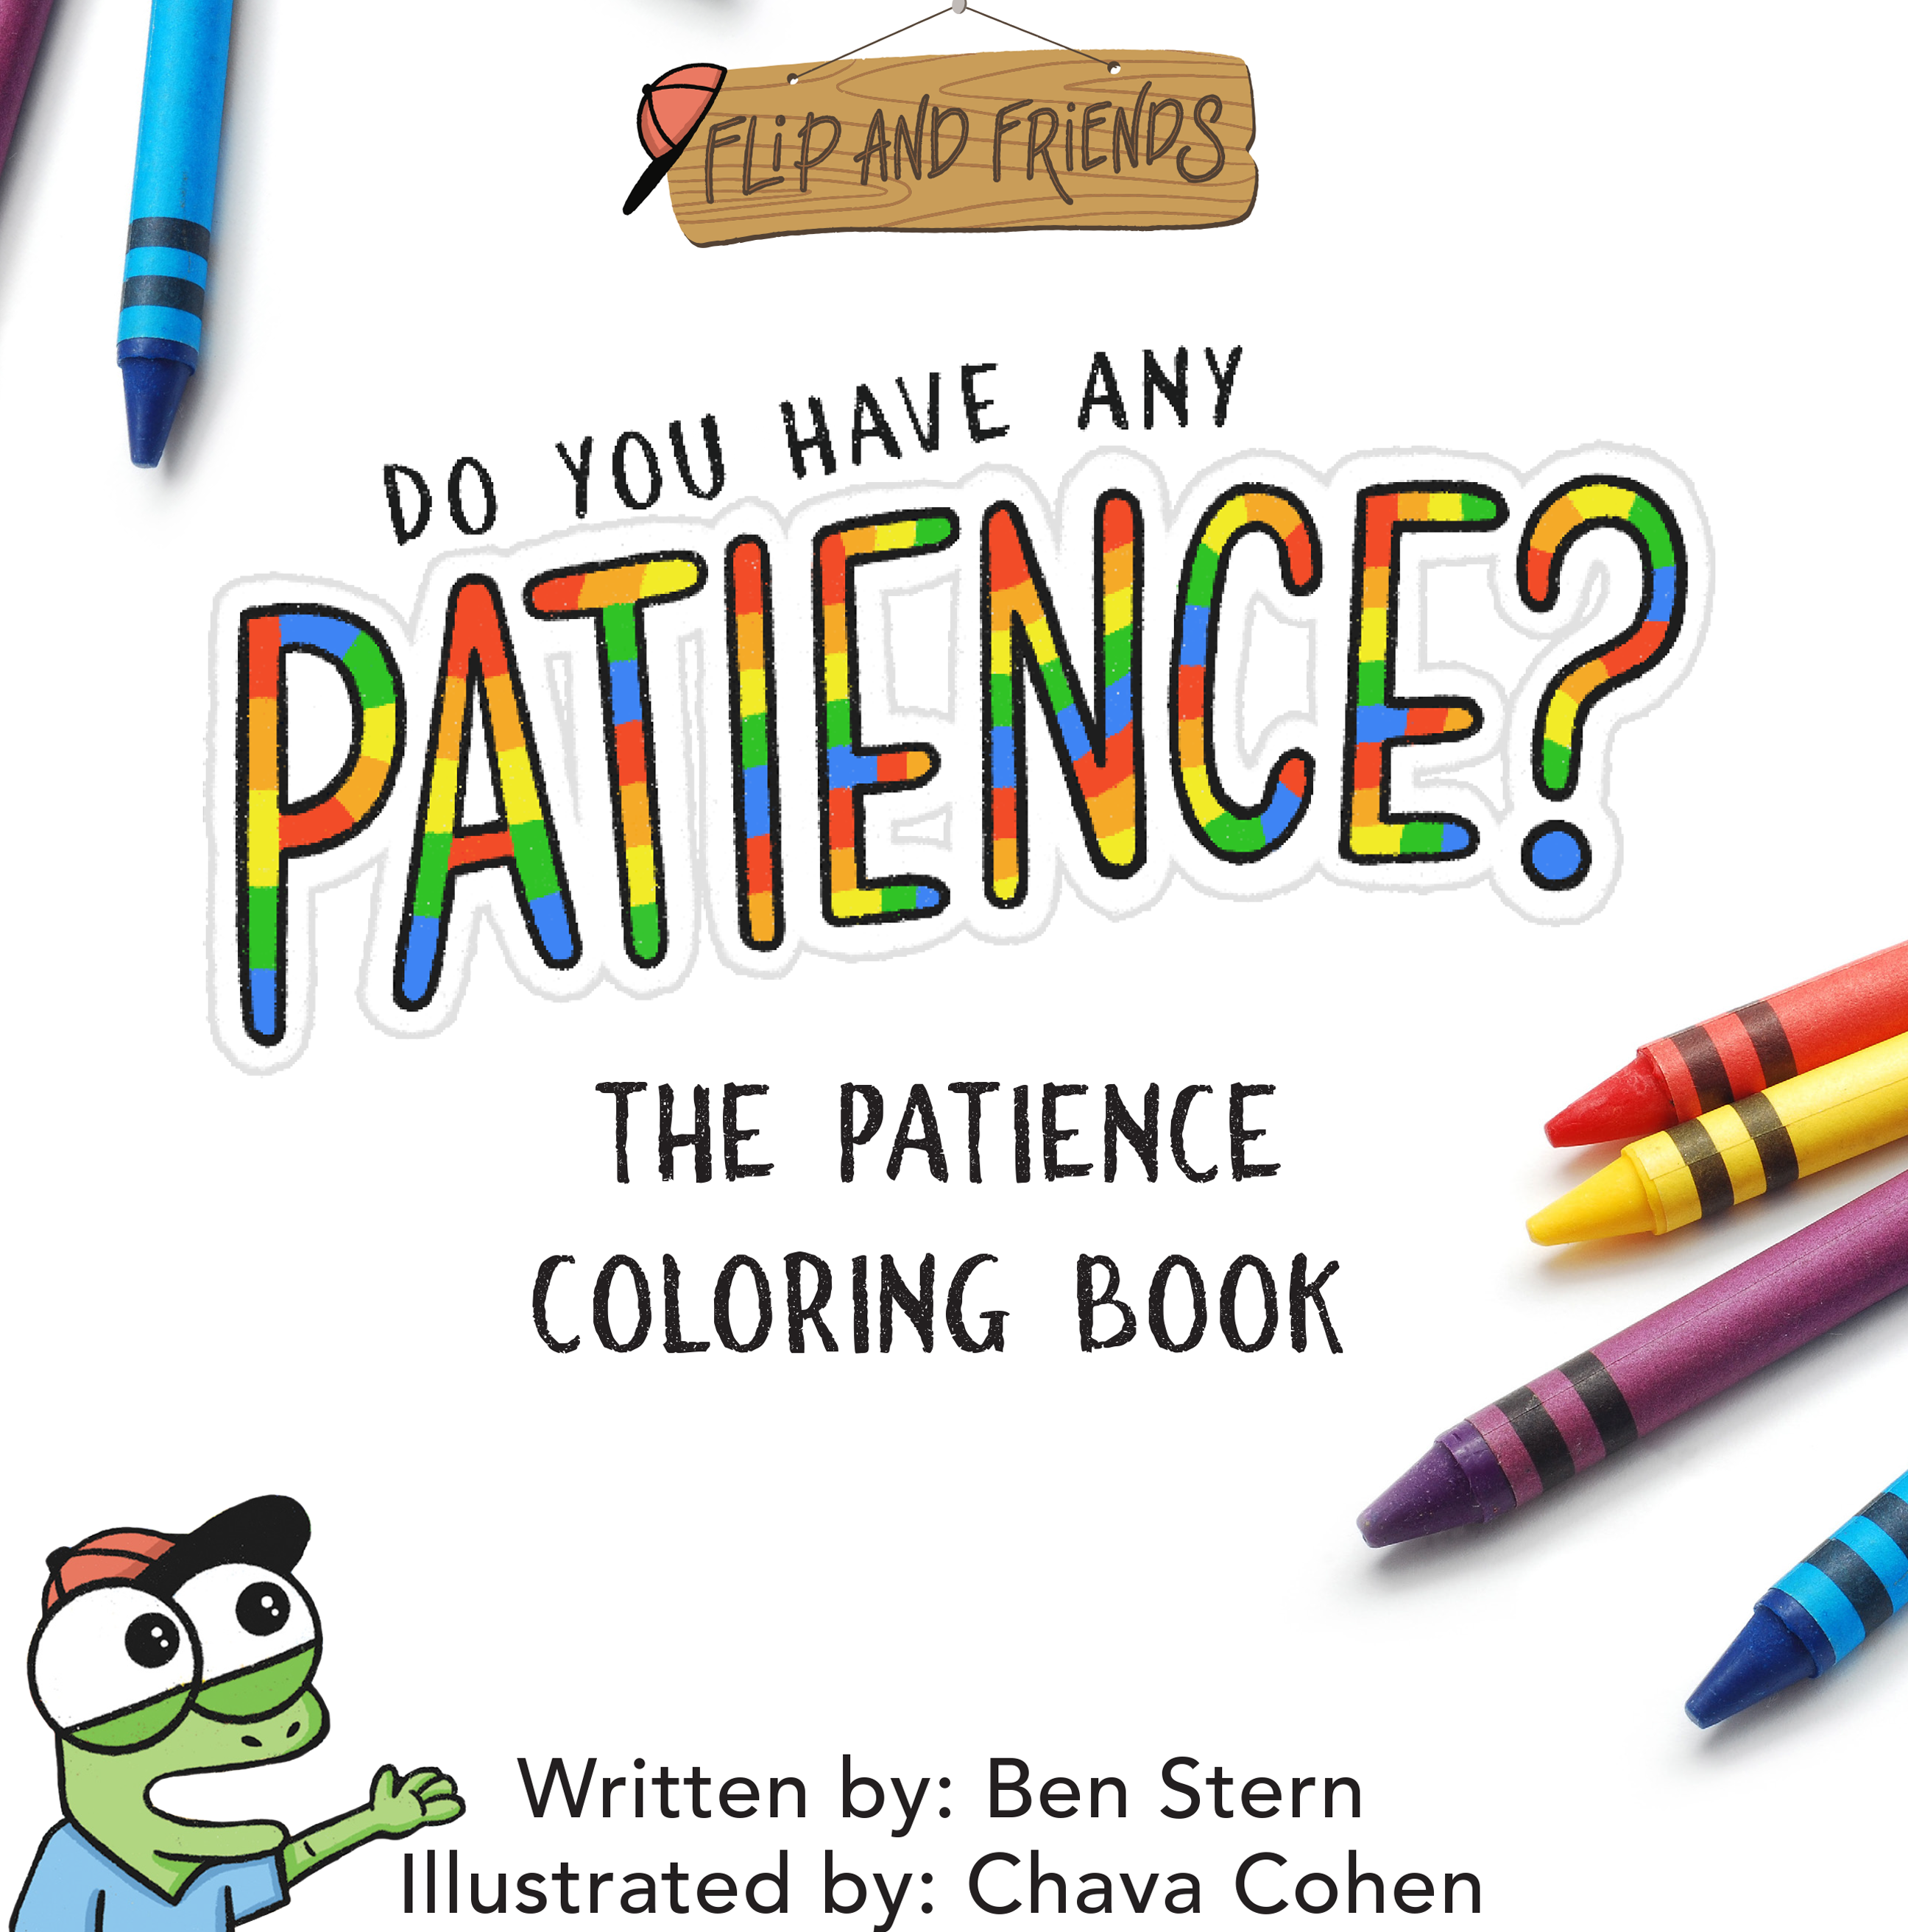 The Patience Coloring Book